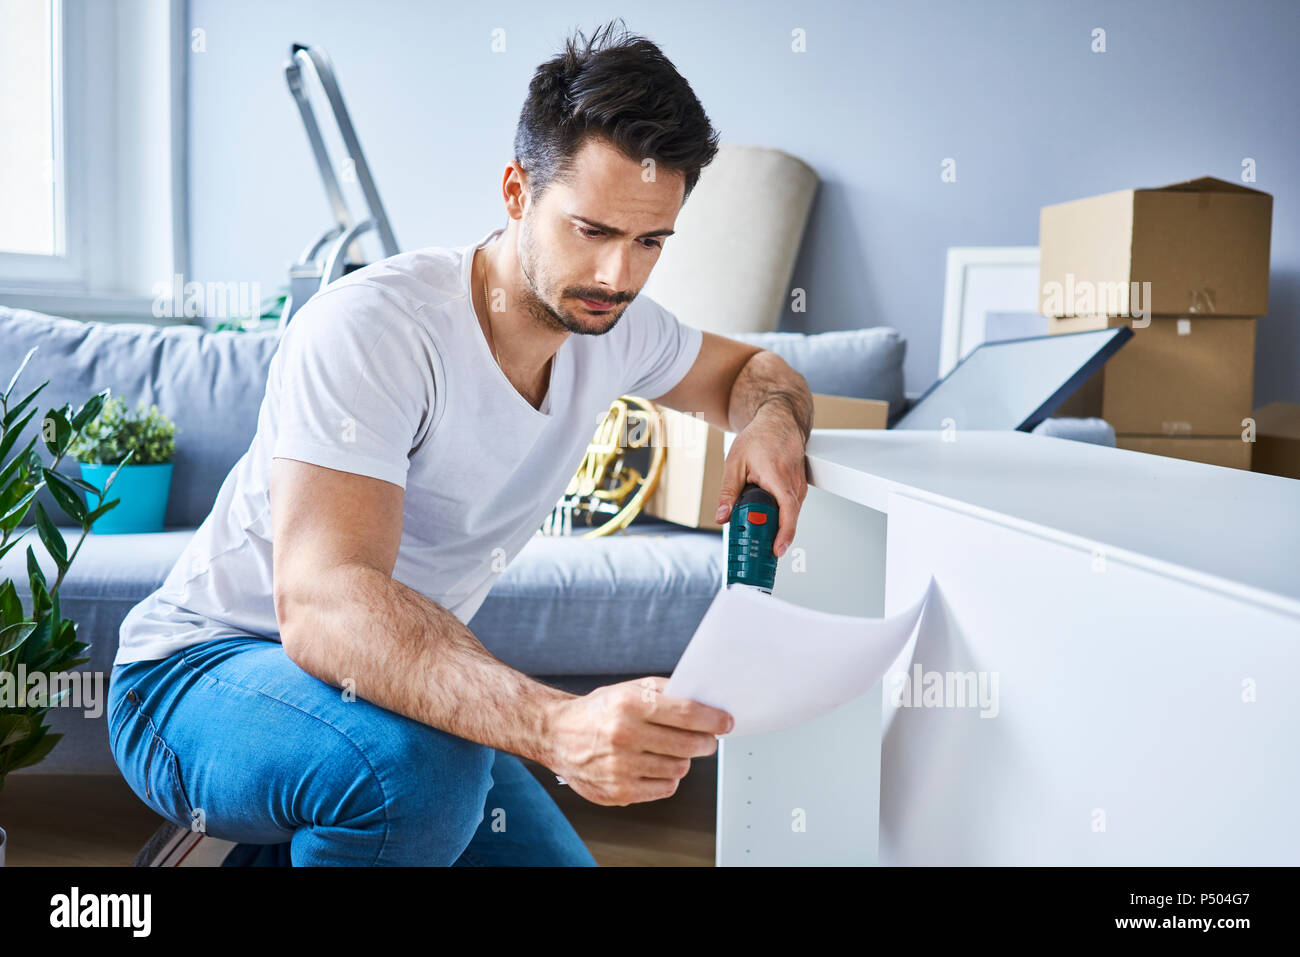 Man Reading Instructions While Assembling Furniture In New